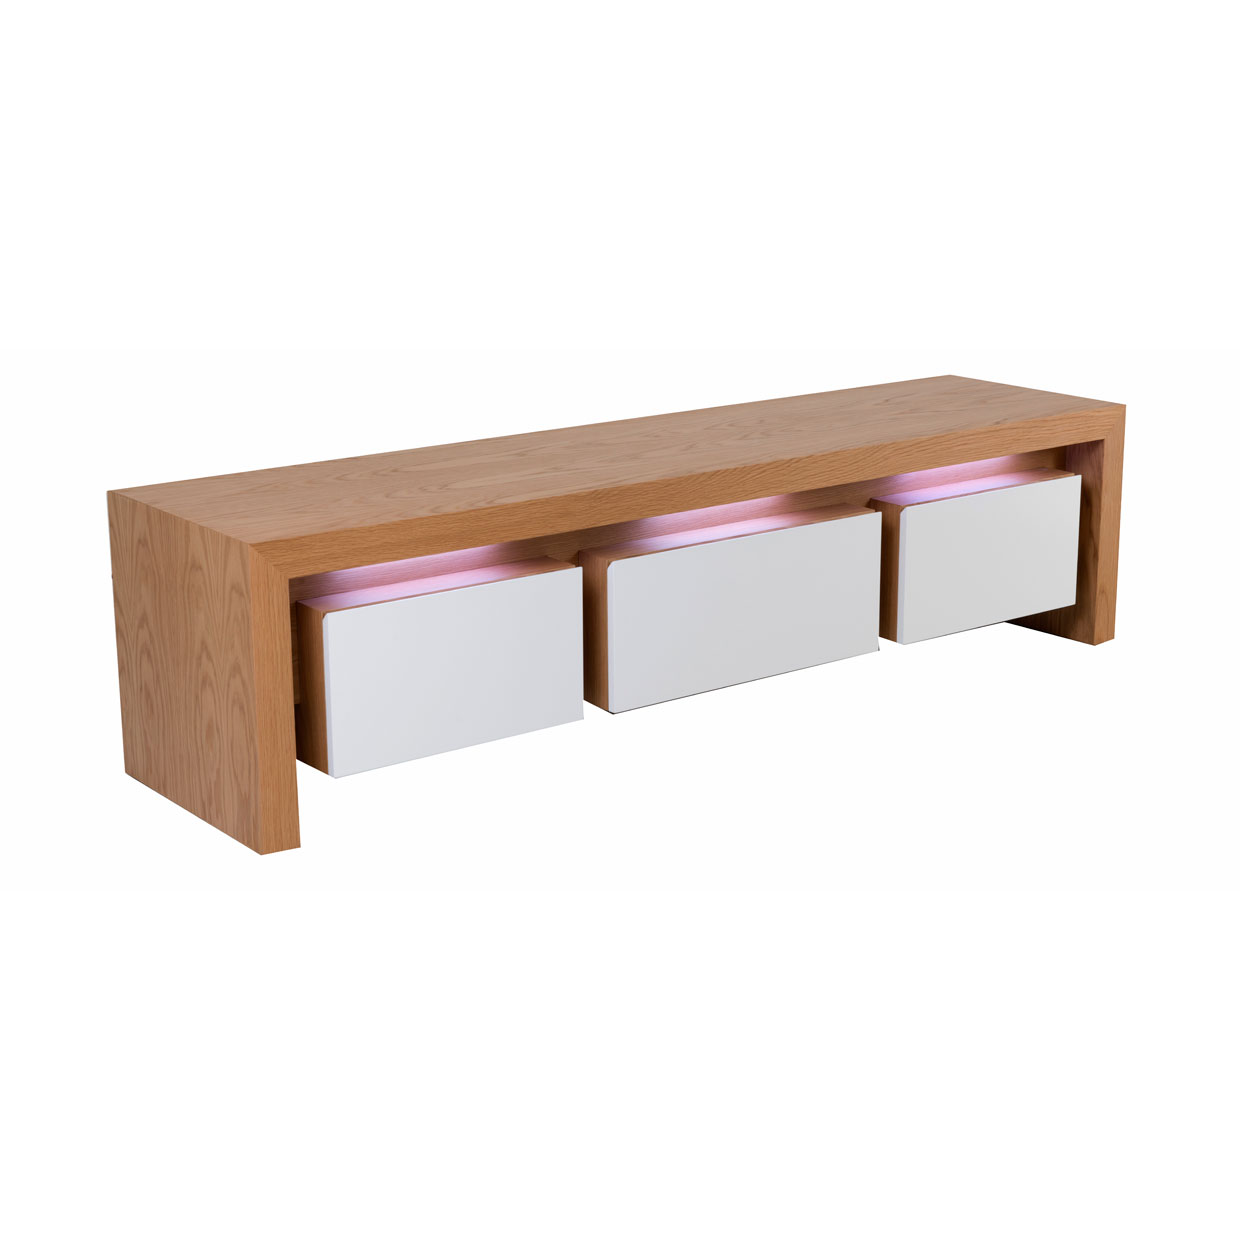 mclaren TV unit 3 drawers solid timber and LED made in Adelaide